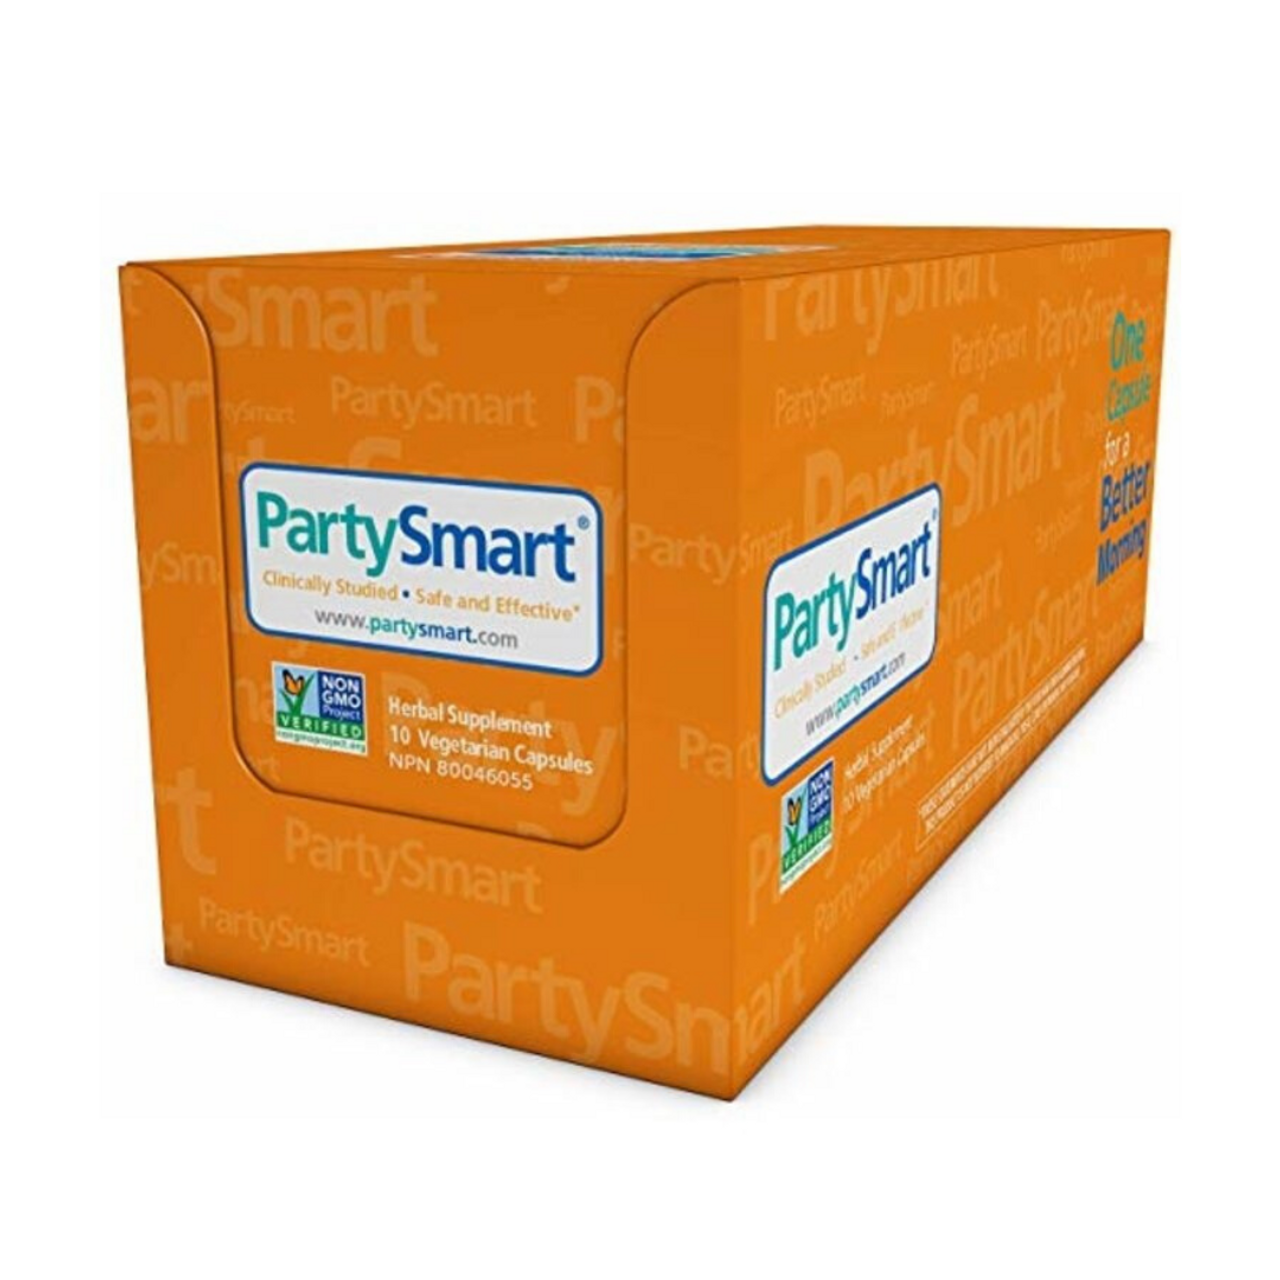 PARTY SMART 6 pack, 605069064965 – Finlandia Natural Pharmacy